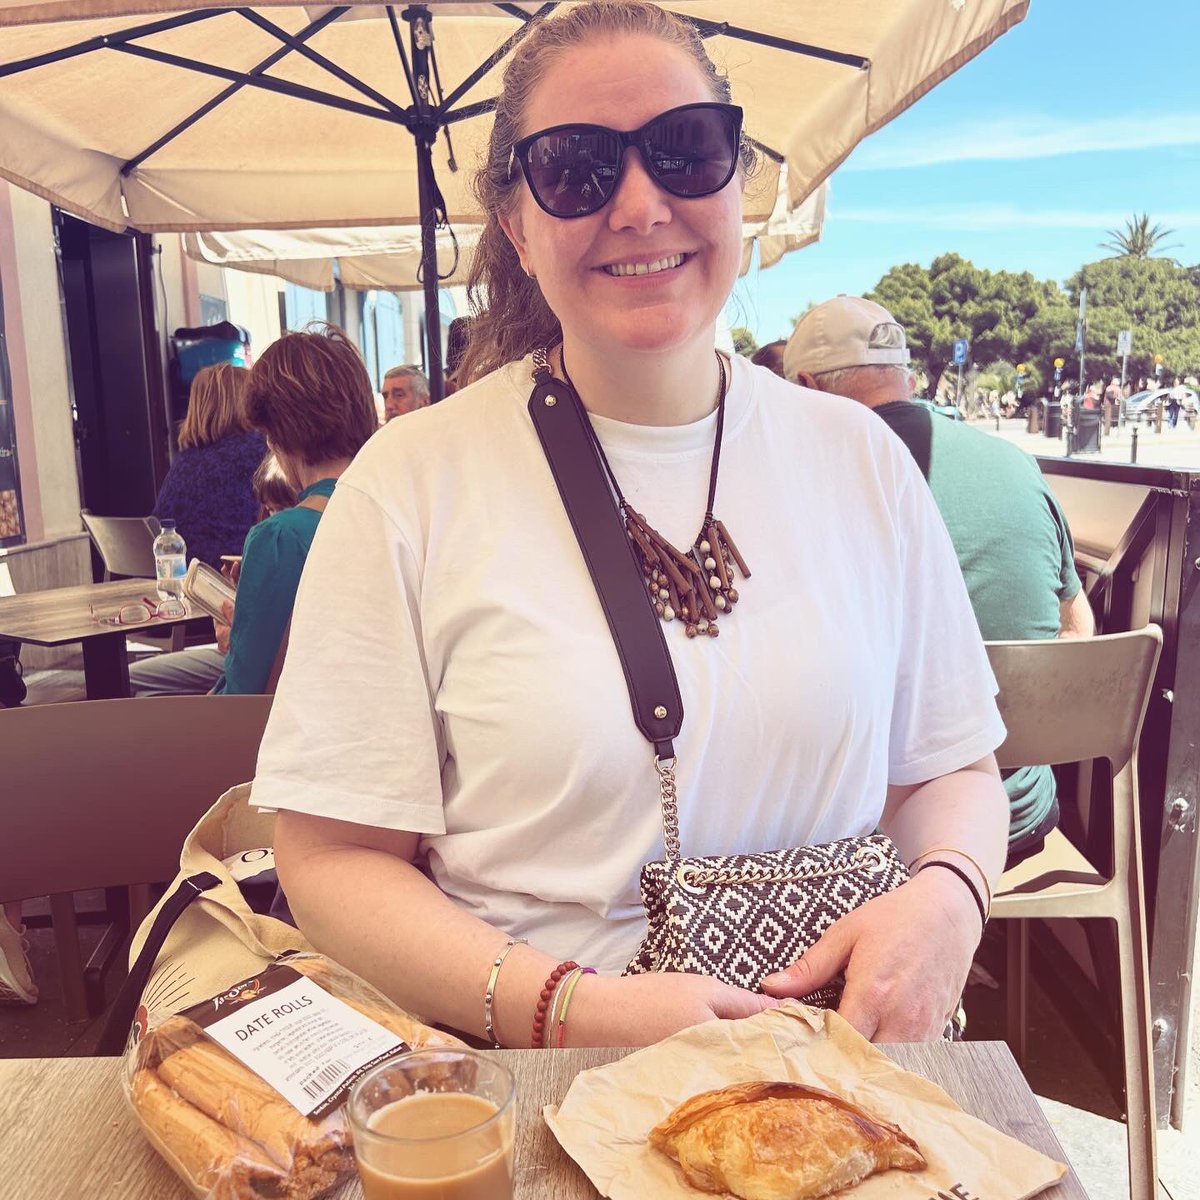 Malta is fuelled by the pastizz - a small, diamond-shaped parcel of flaky pastry filled with ricotta cheese, mushy peas or chicken. You can eat them for breakfast, lunch, an afternoon snack… you get the gist.
@VisitMalta 
#pastizz #malta #travelwriter #traveljournalist